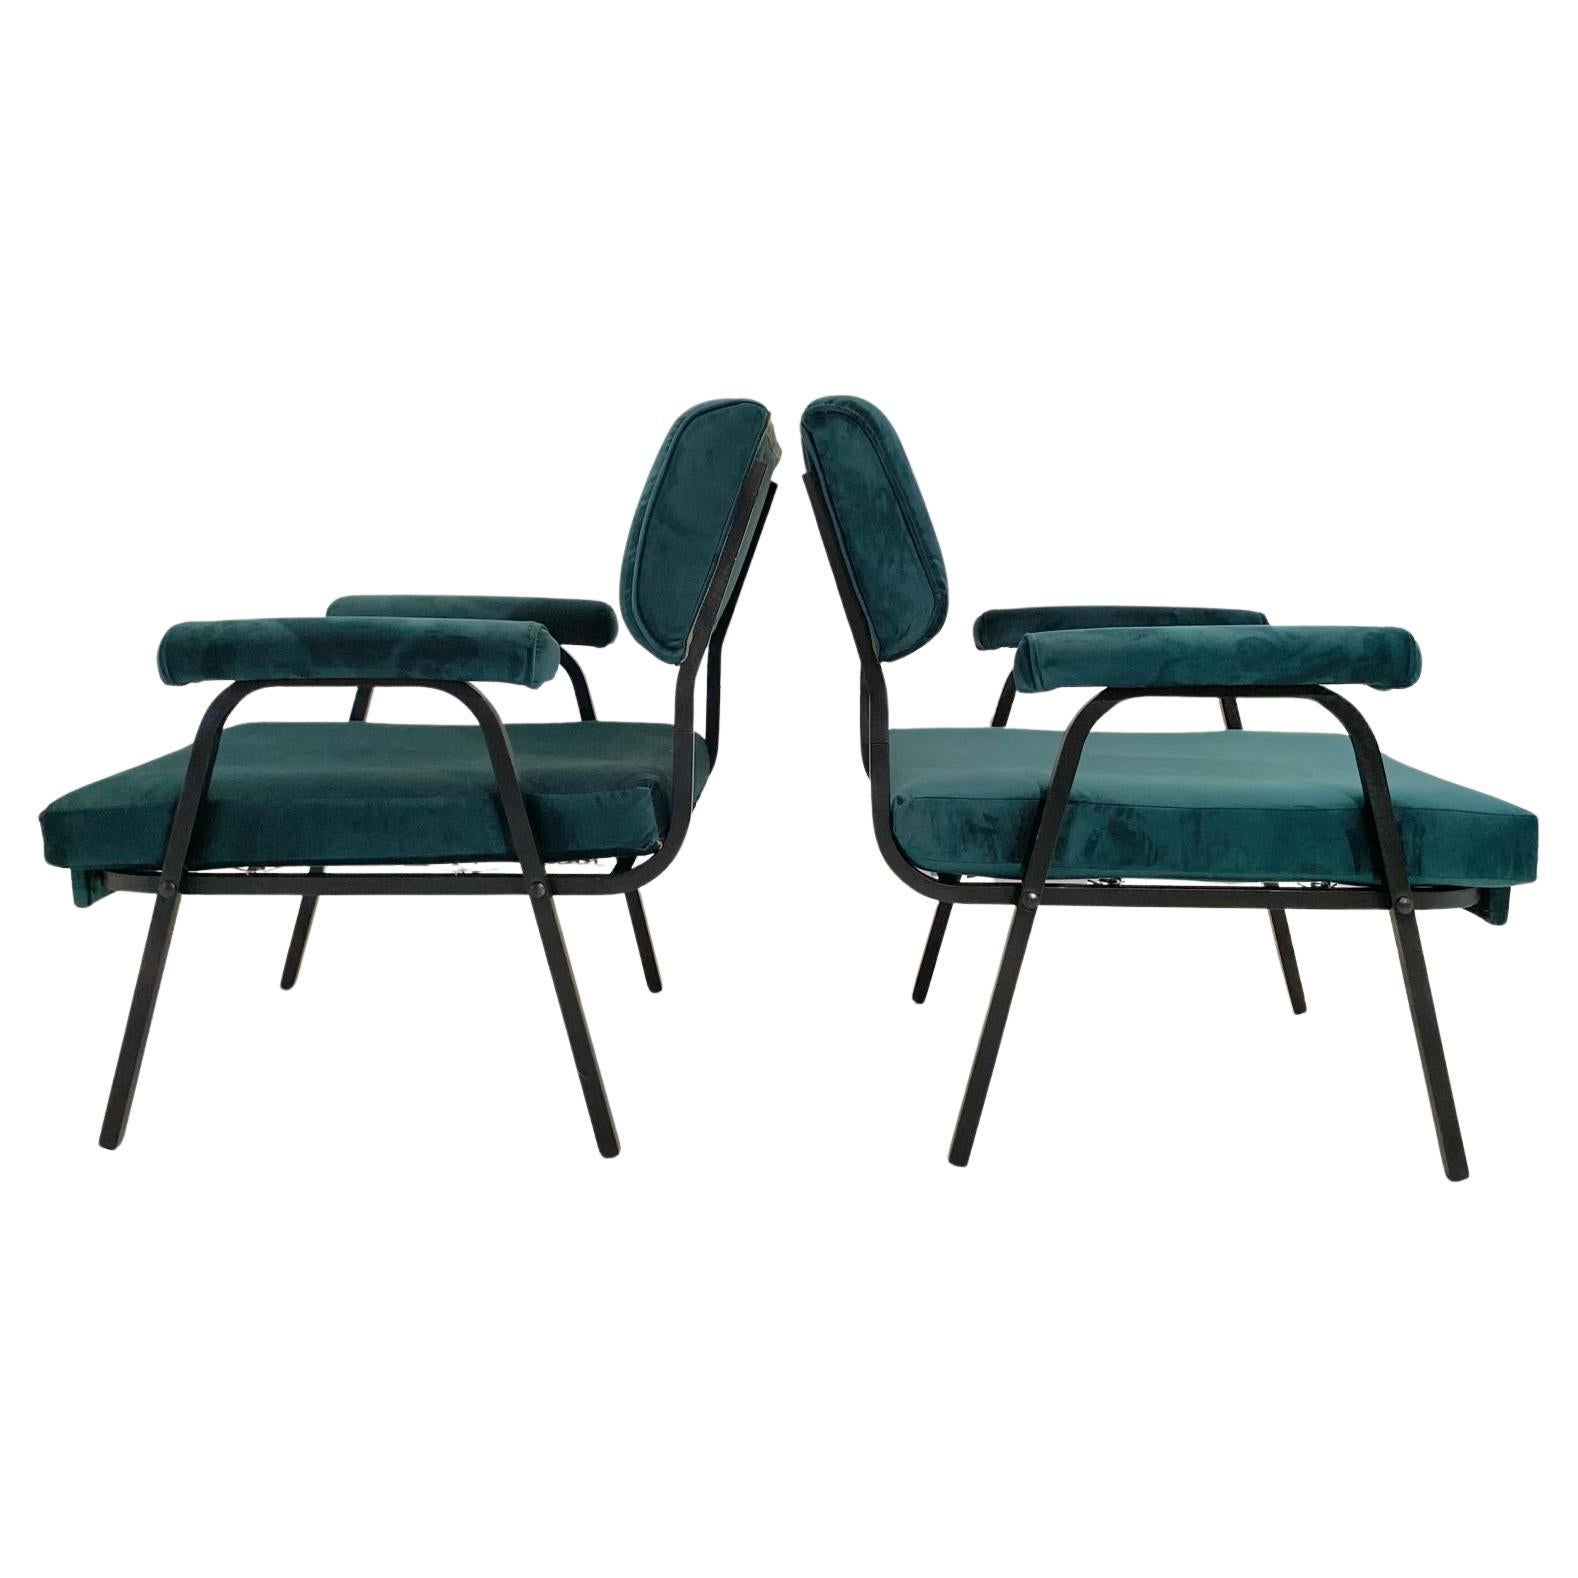 Green velvet lounge chairs, Set of Two, vintage, Italy, 1960s